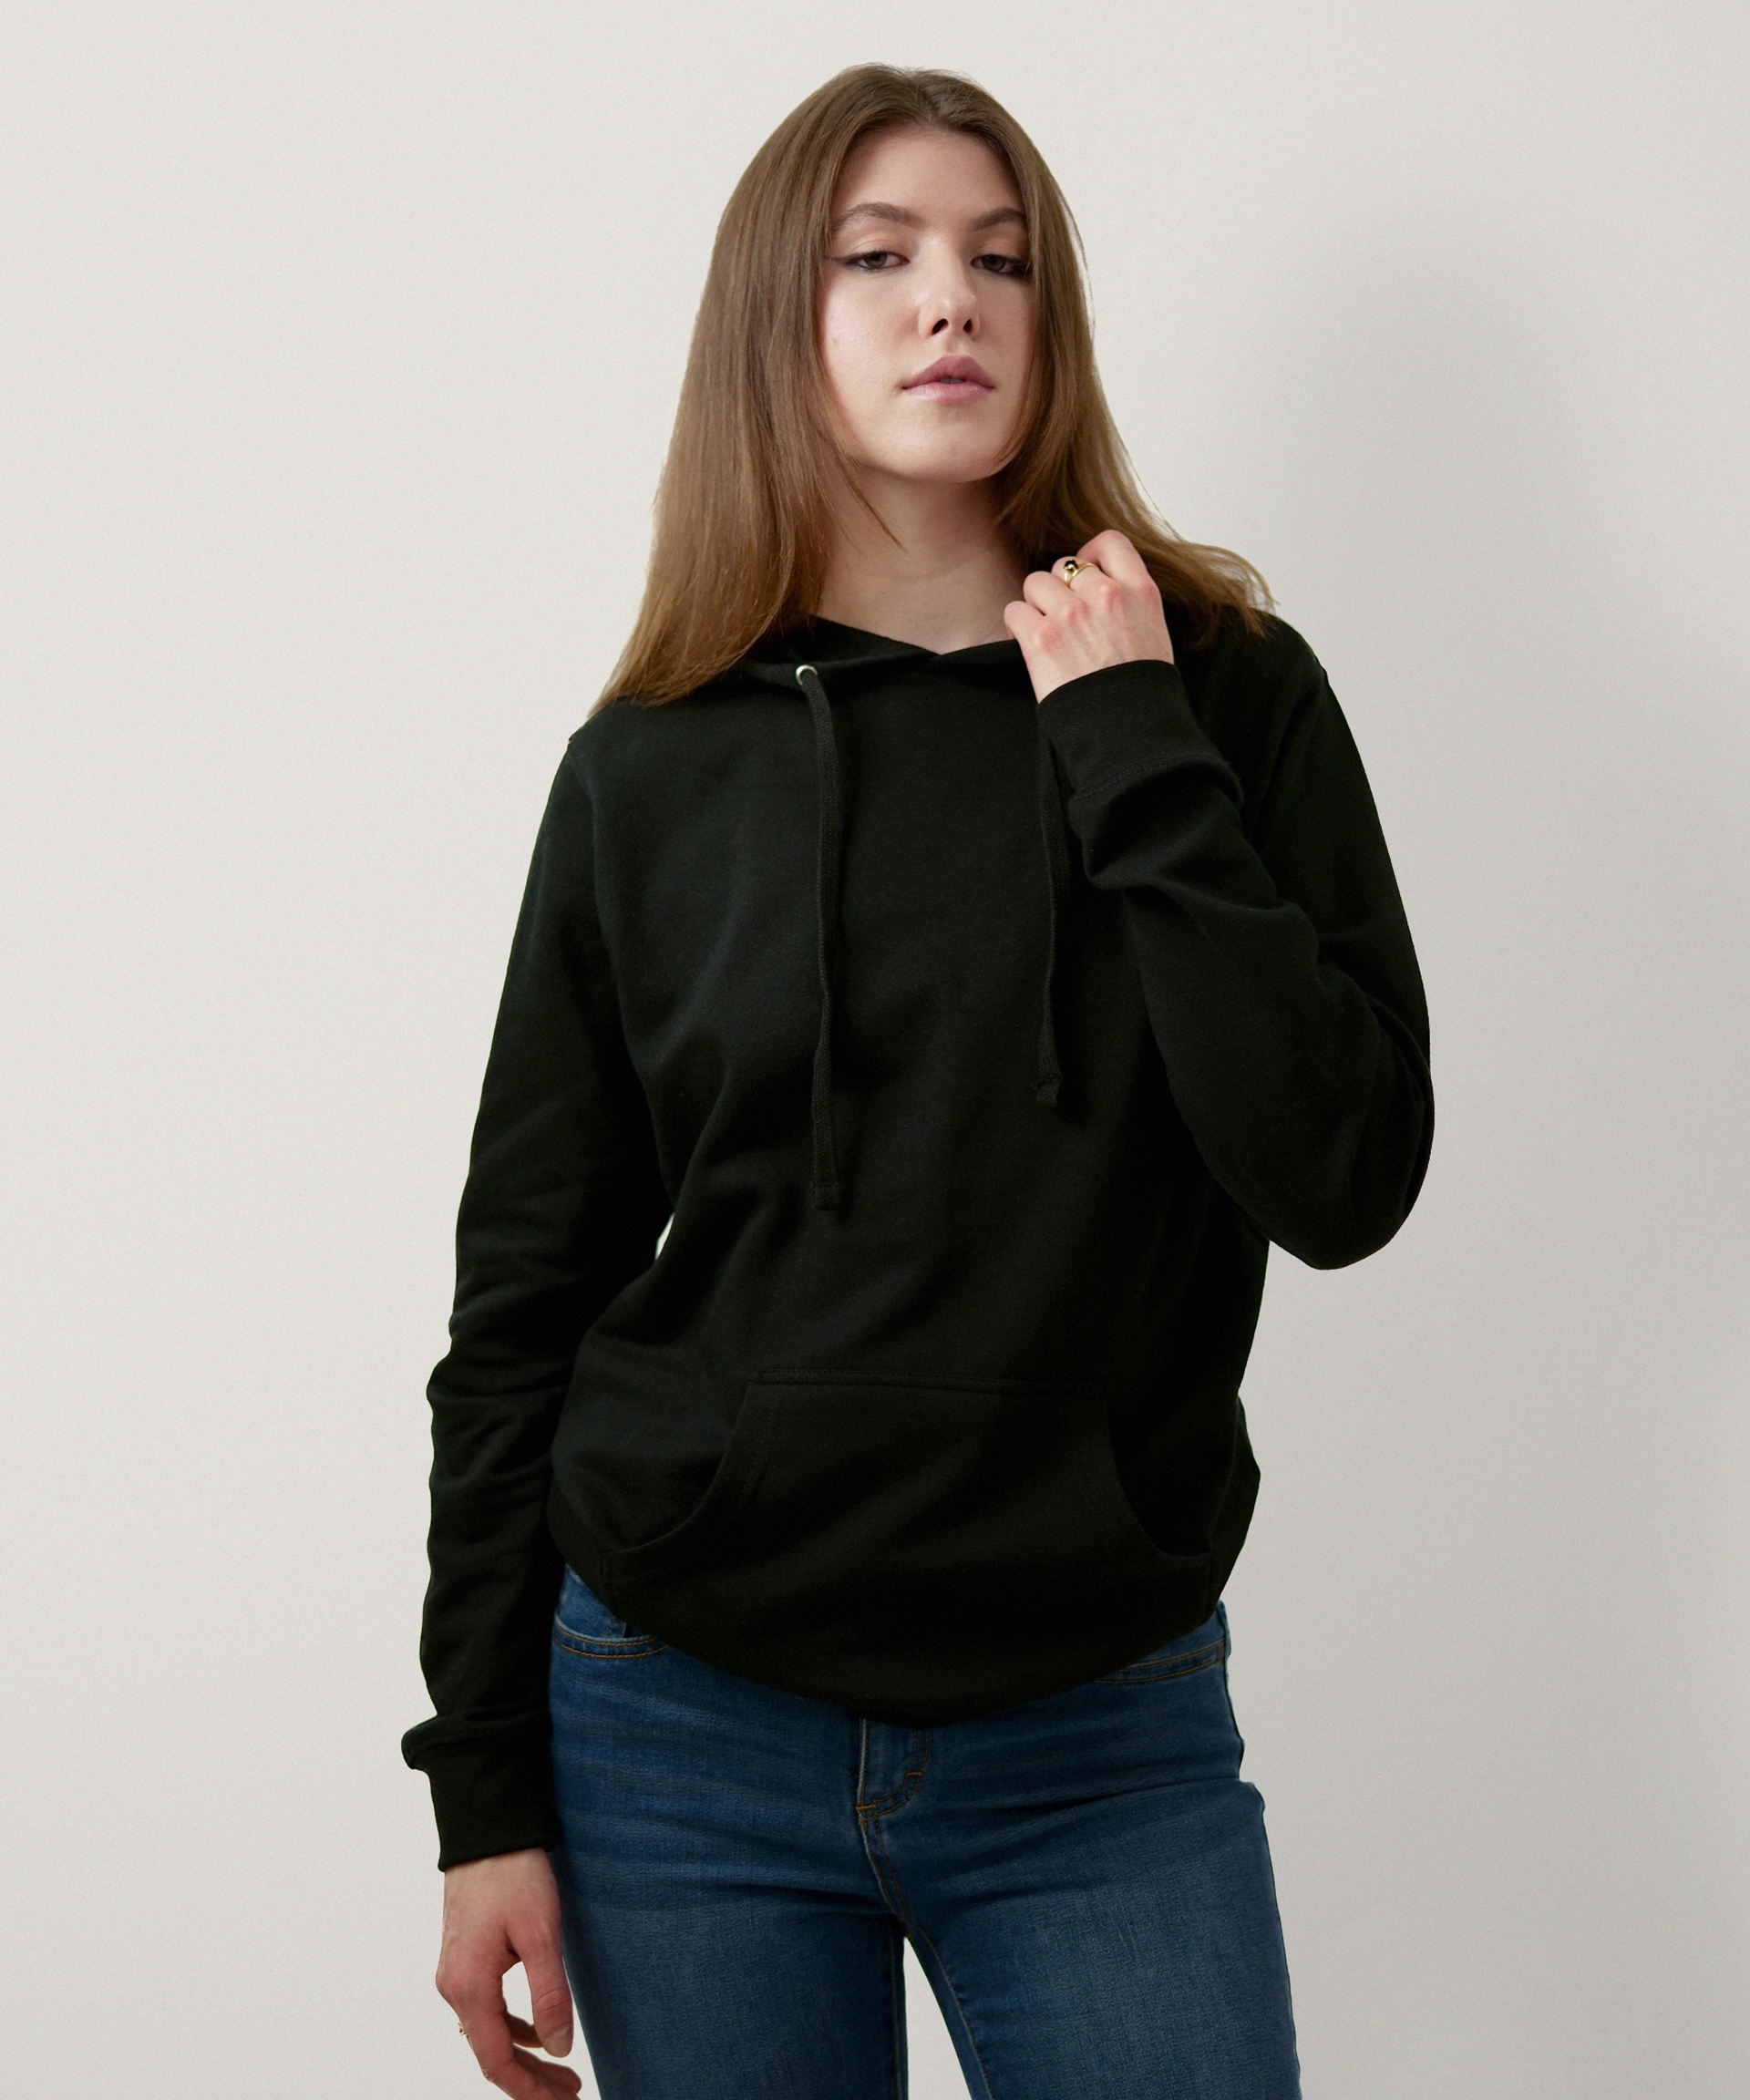 Essential Pullover Hoodie for Women (Jet Black)